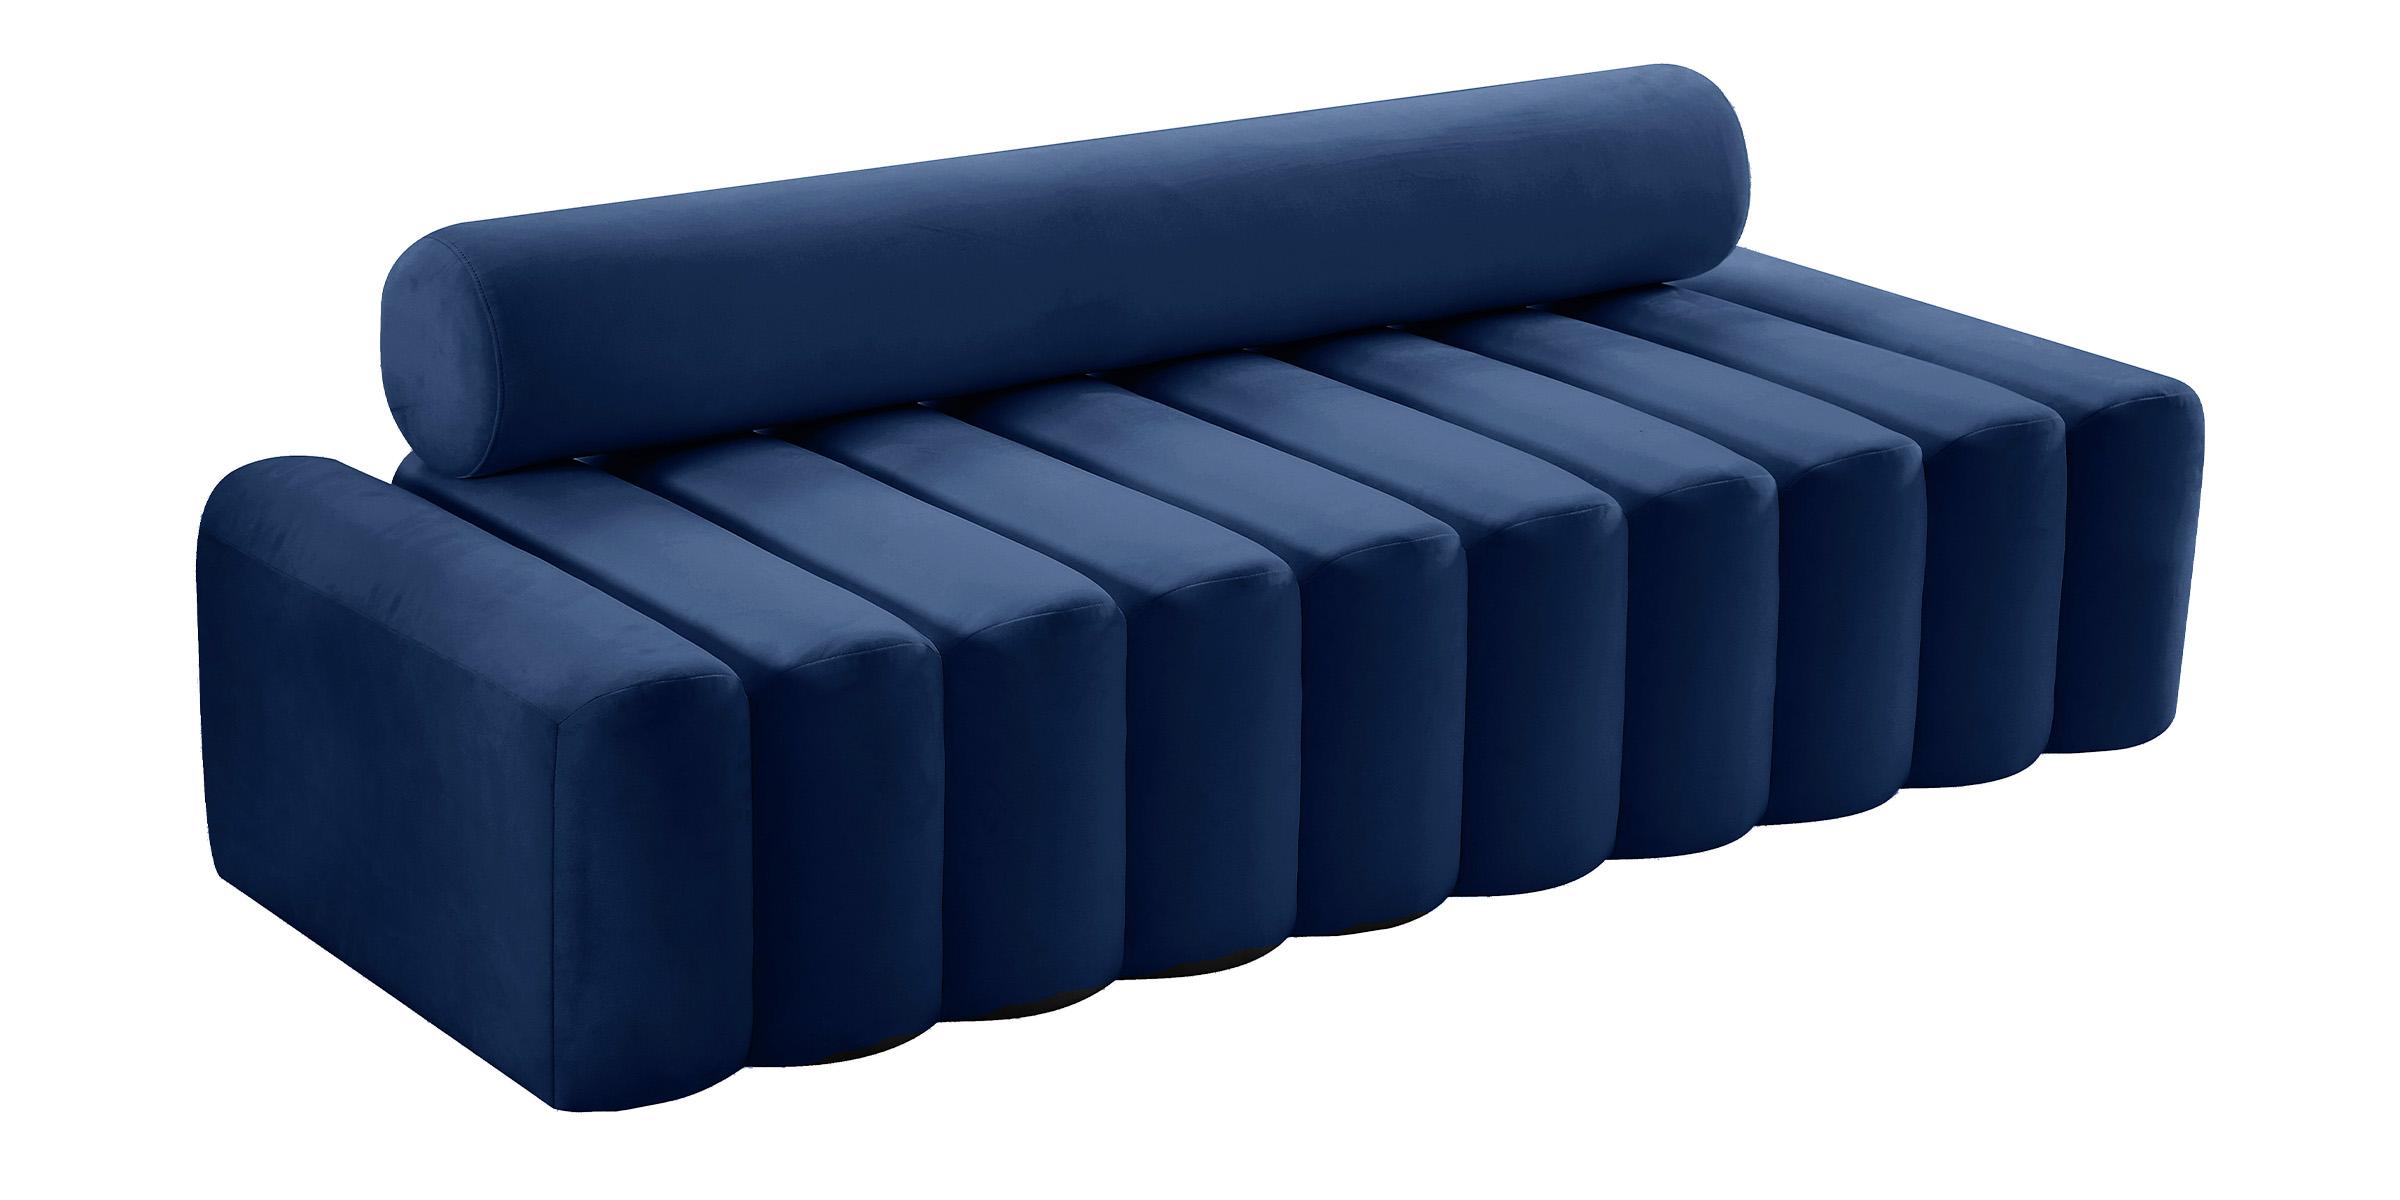 

    
Glam NAVY Velvet Channel Tufted Melody Sofa 647Navy-S Meridian Contemporary
